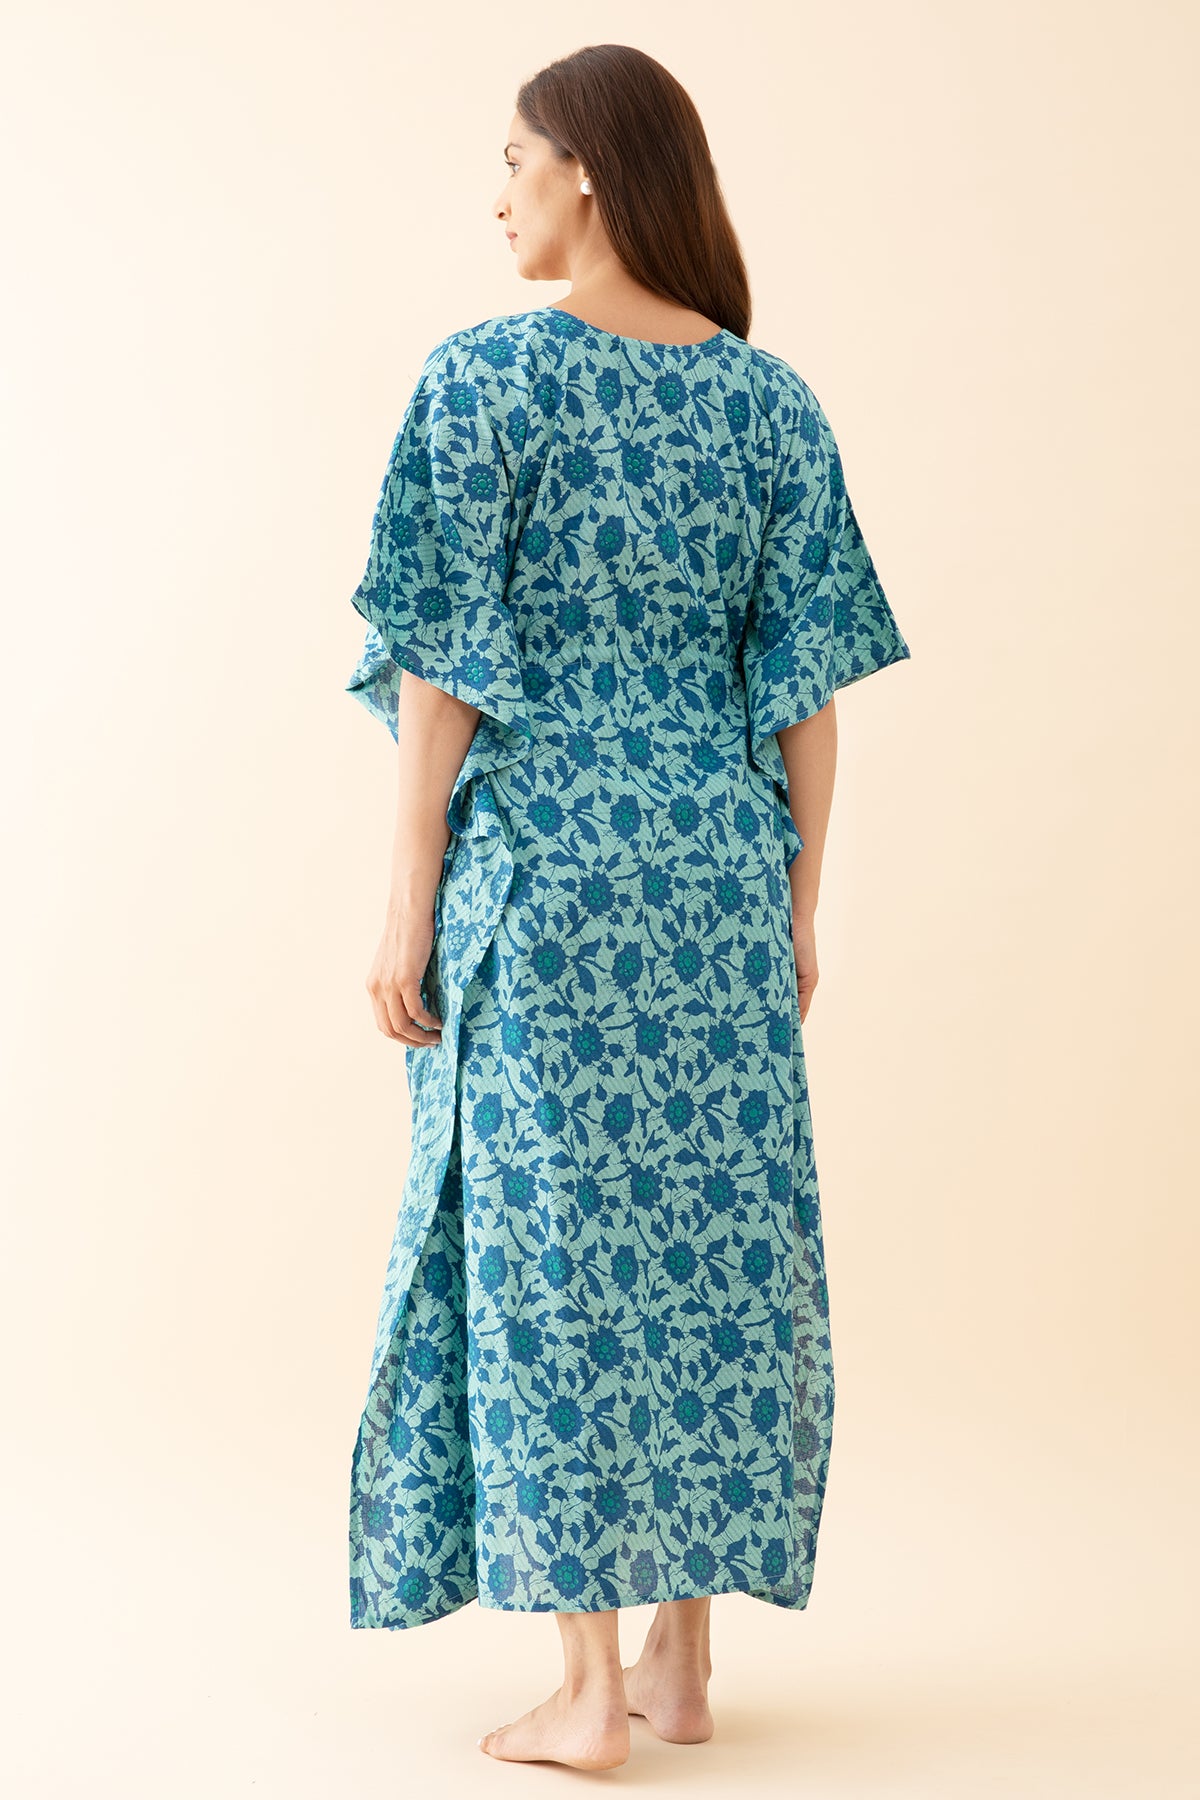 Abstract Floral Printed Kaftan with Front tie up Drawstring Blue